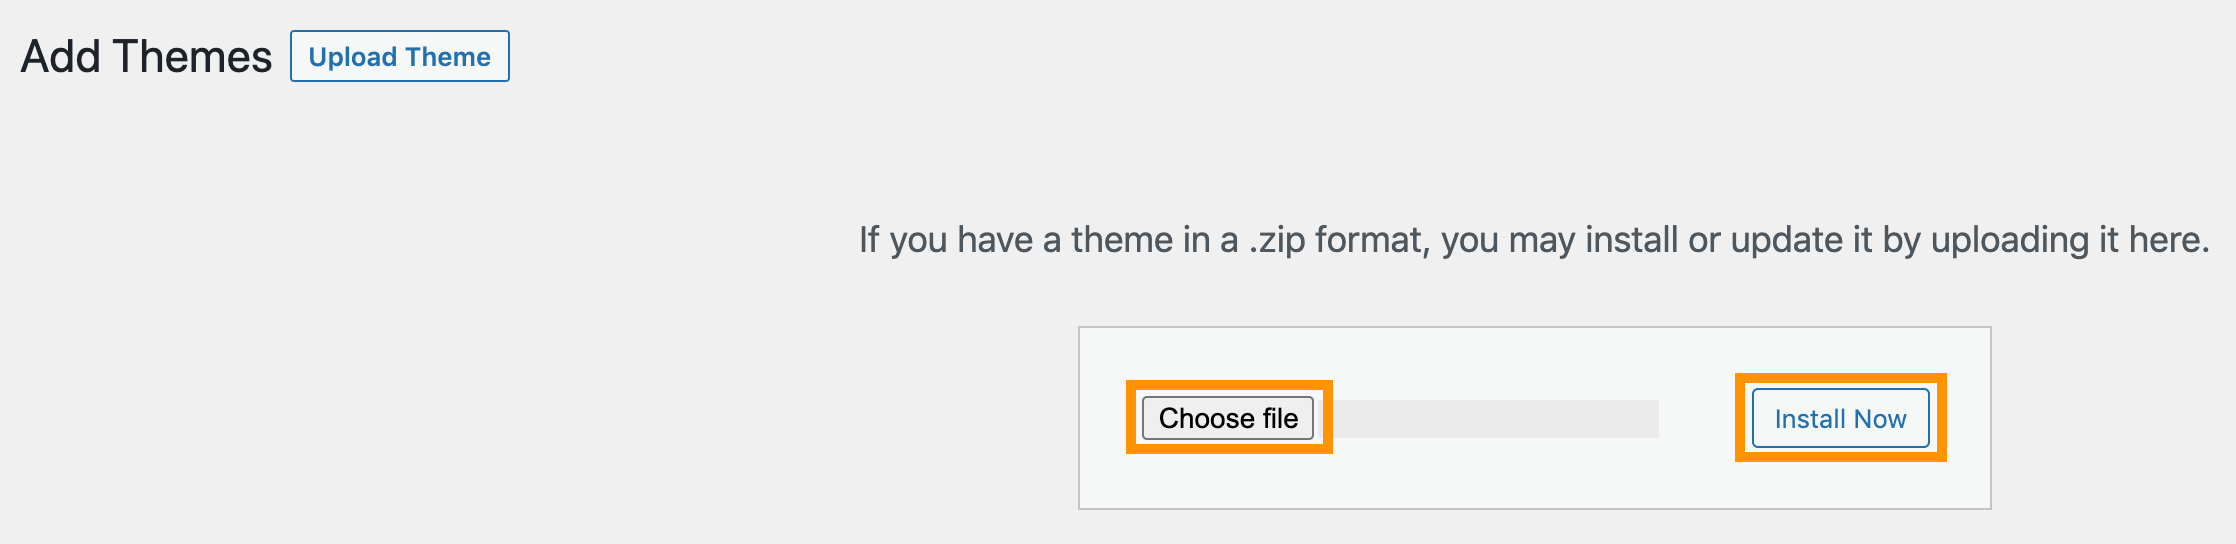 global theme choose file install now